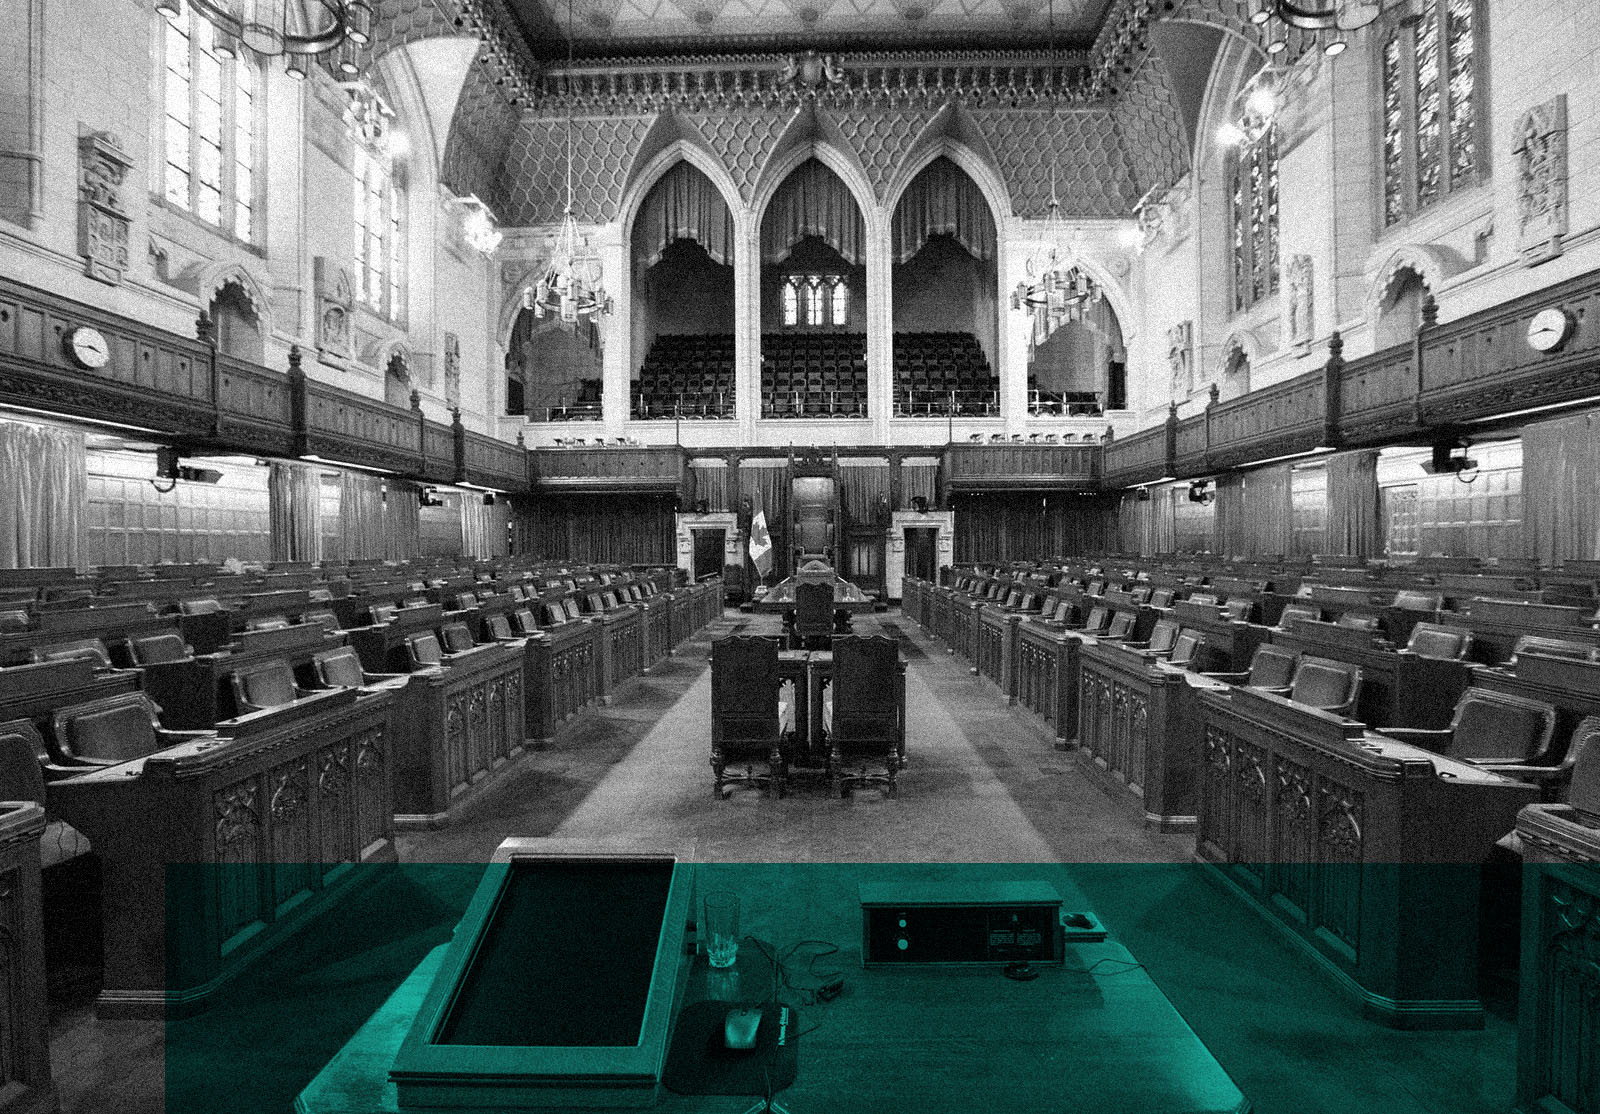 The House of Commons in the Canadian Parliament Building